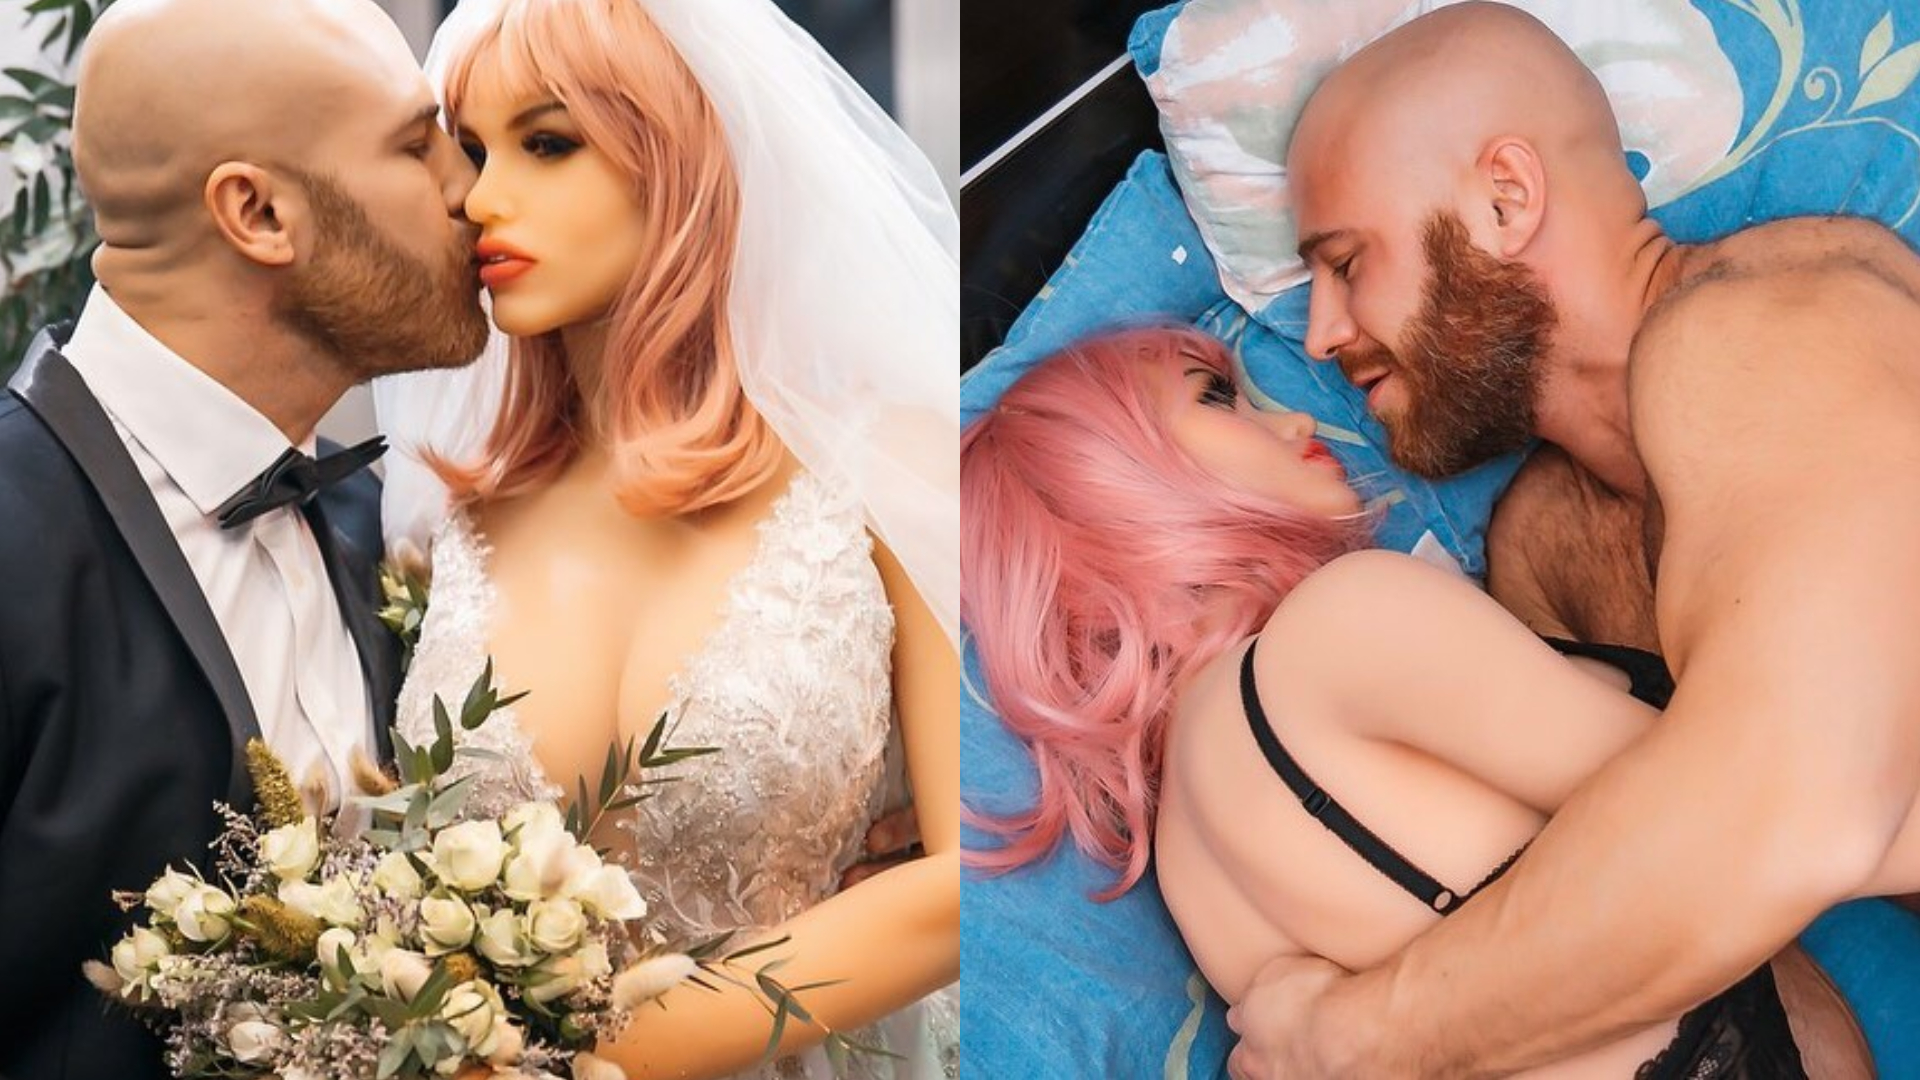 Meet the Man Who Married His Sex Doll photo